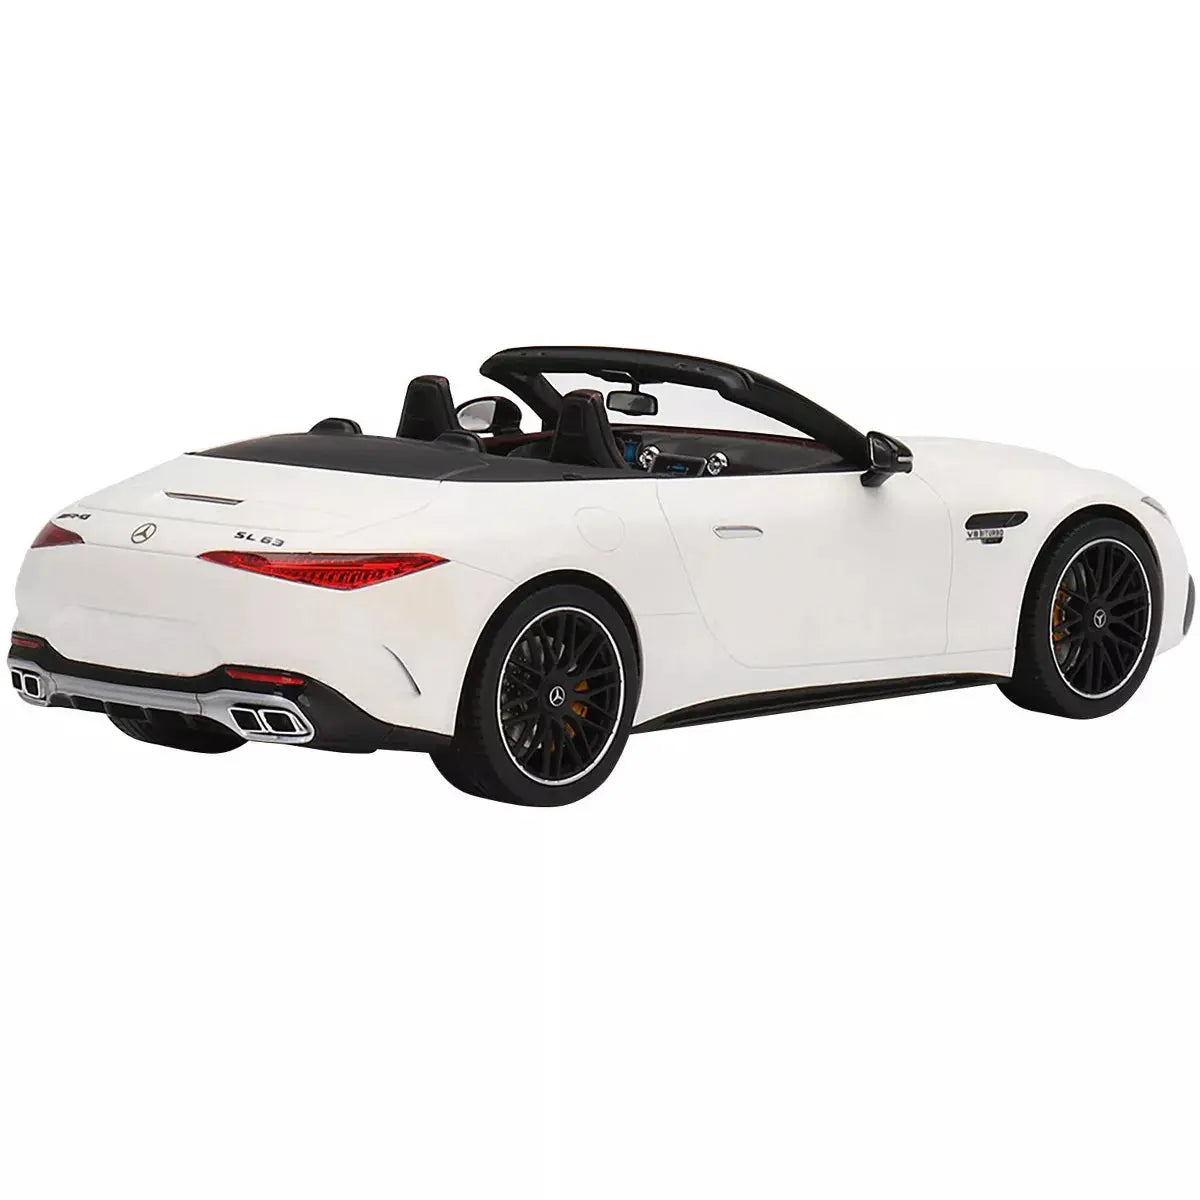 1:18 SCALE Mercedes-AMG SL 63 Roadster - Perfect Diecast